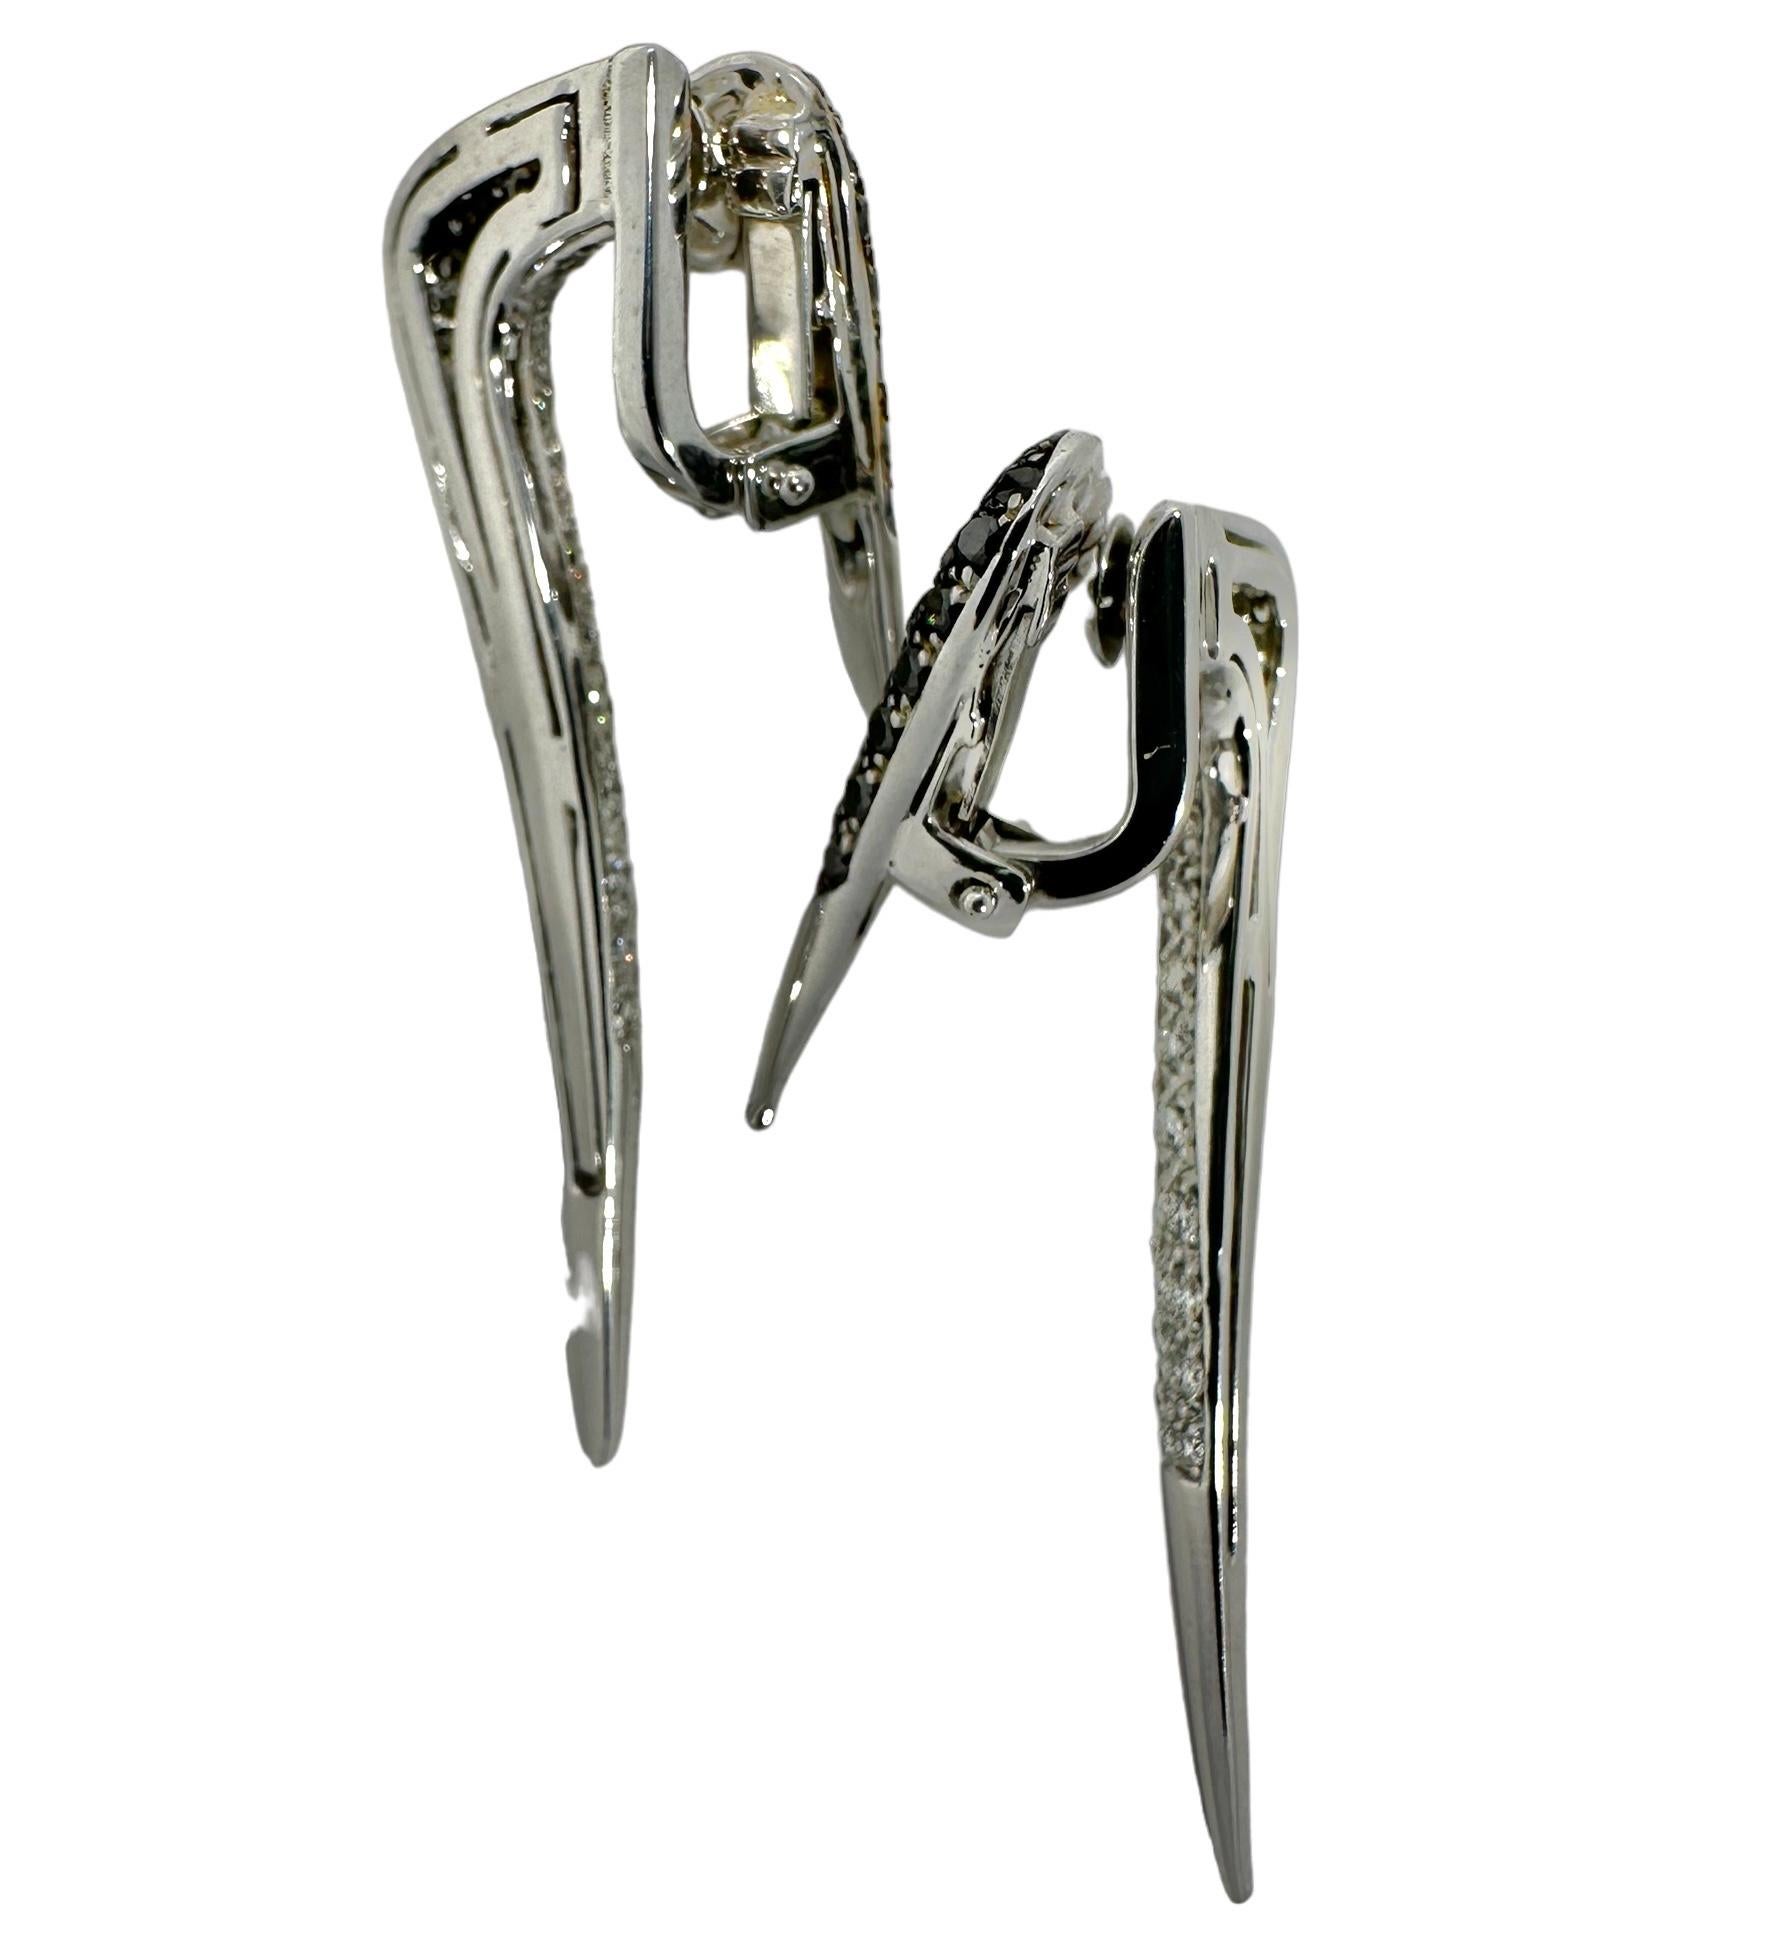 This scintillating pair of 18k white gold and diamond icicle earrings are worn in front and behind the ear. They give the illusion that they actually pierce the wearer's ears, but in fact they do not. They simply clip firmly onto the earlobe. Panels